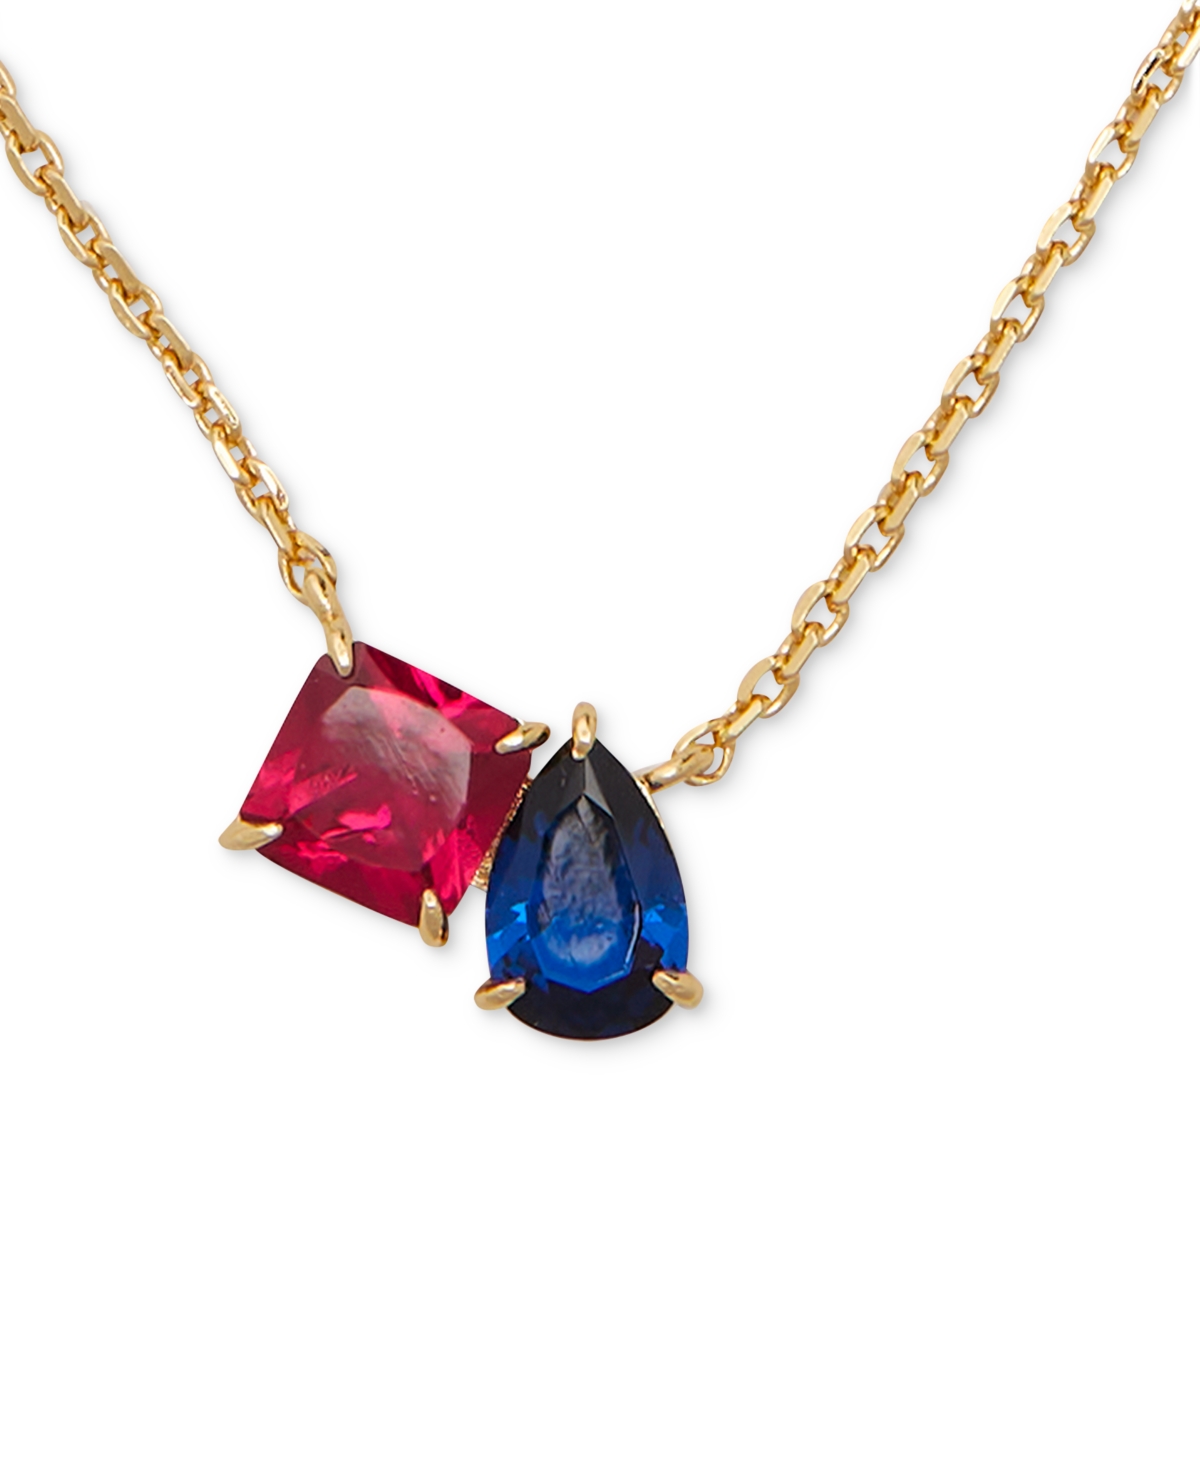 Kate Spade Double Crystal Pendant Necklace, 16" + 3" Extender In Red Multi